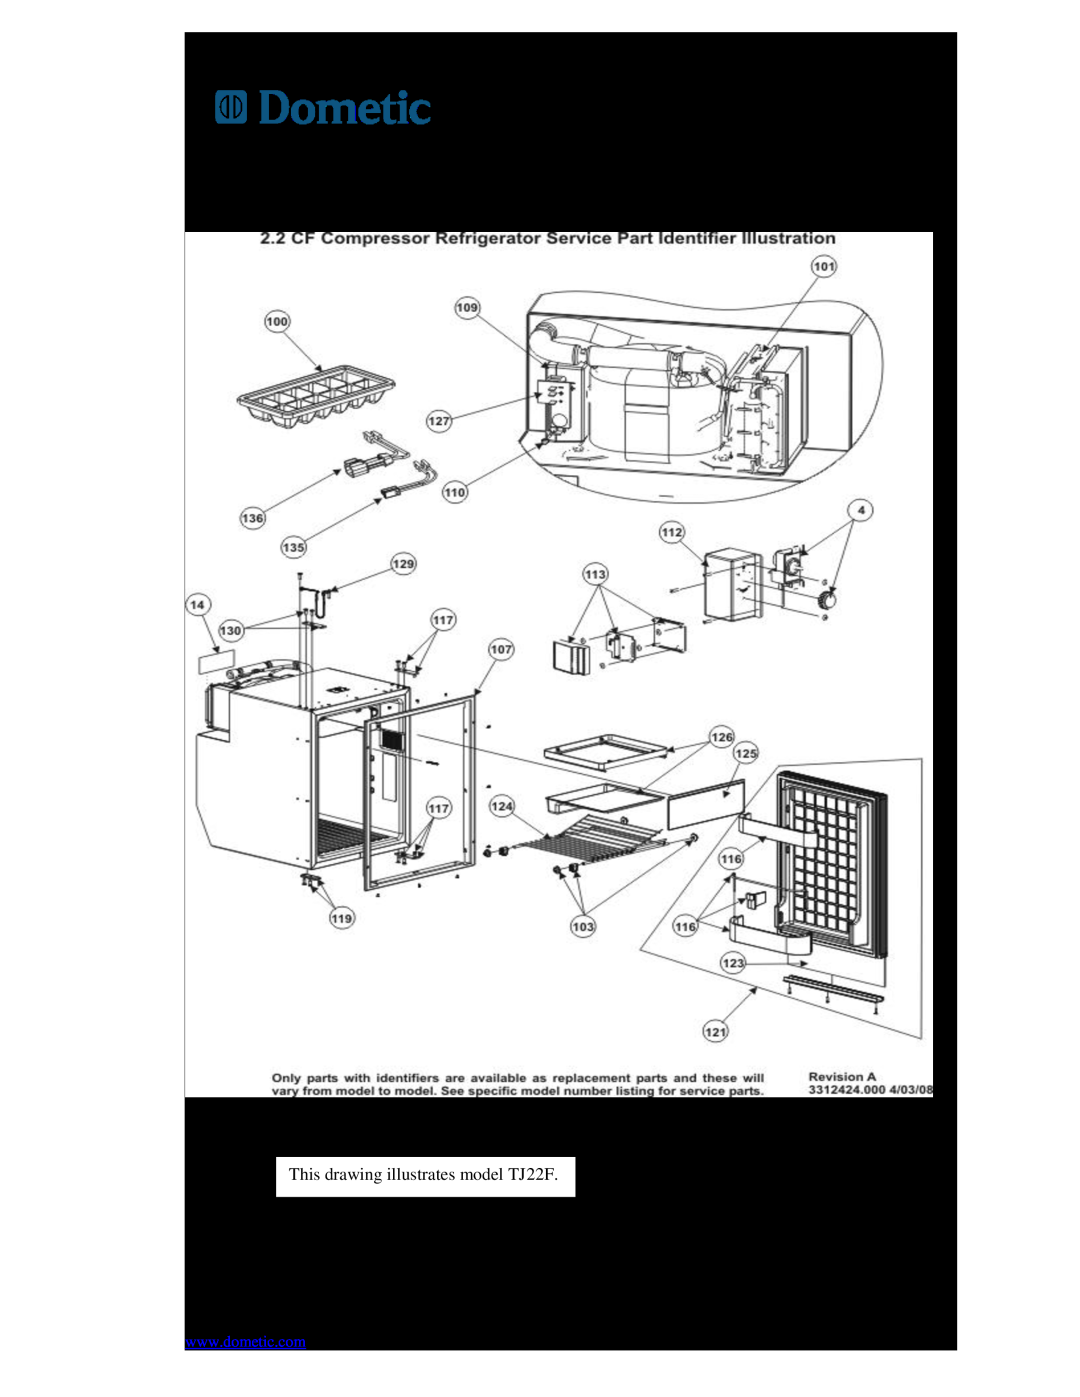 Dometic 750000005 (TJ18F) Freightliner Refrigerator Troubleshooting Guide, Dometic Corporation, Environmental Division 